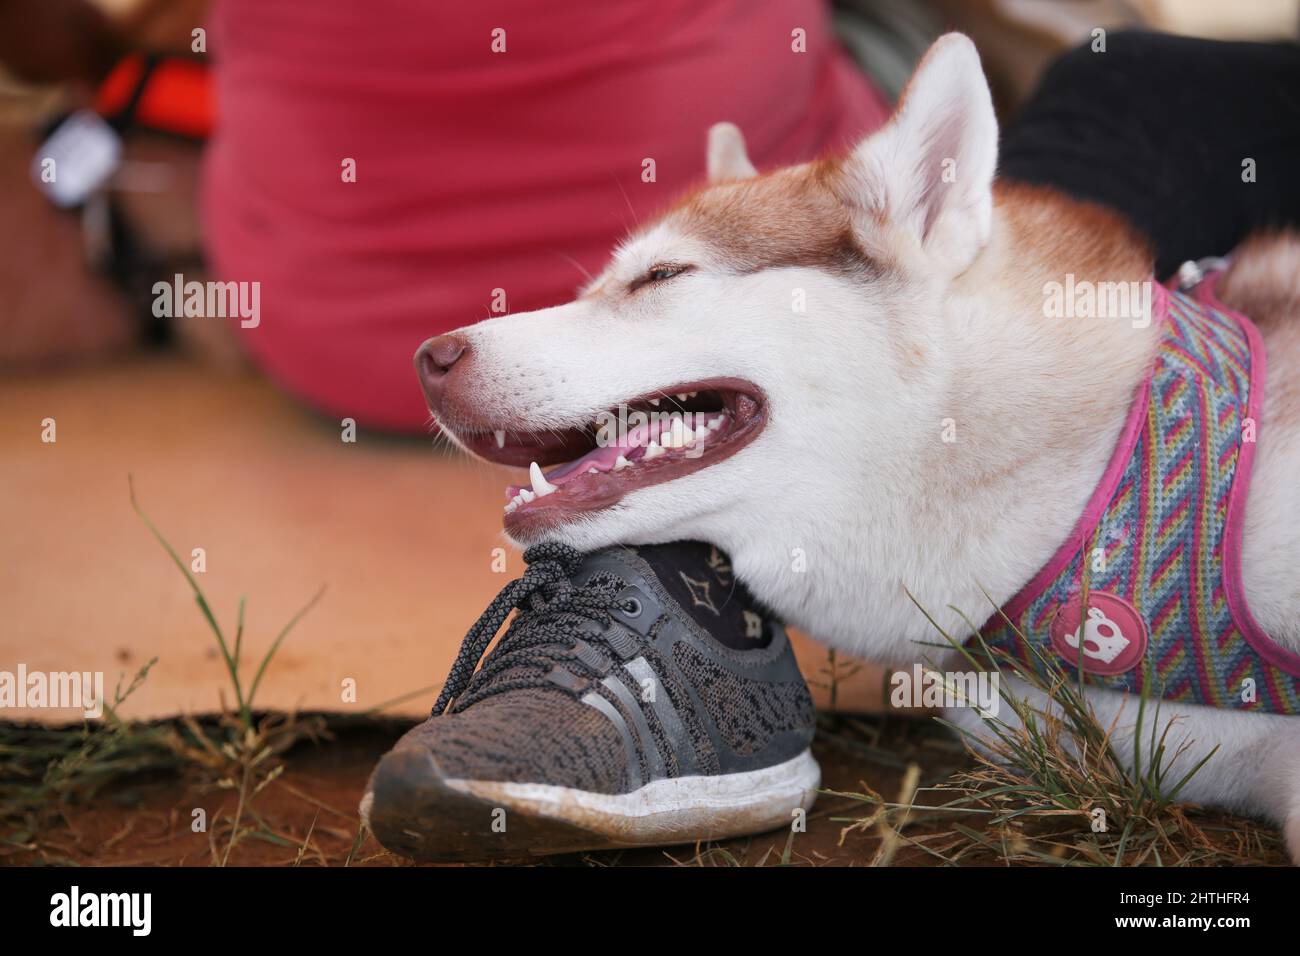 An adorable husky rest on its master's feet. Stock Photo